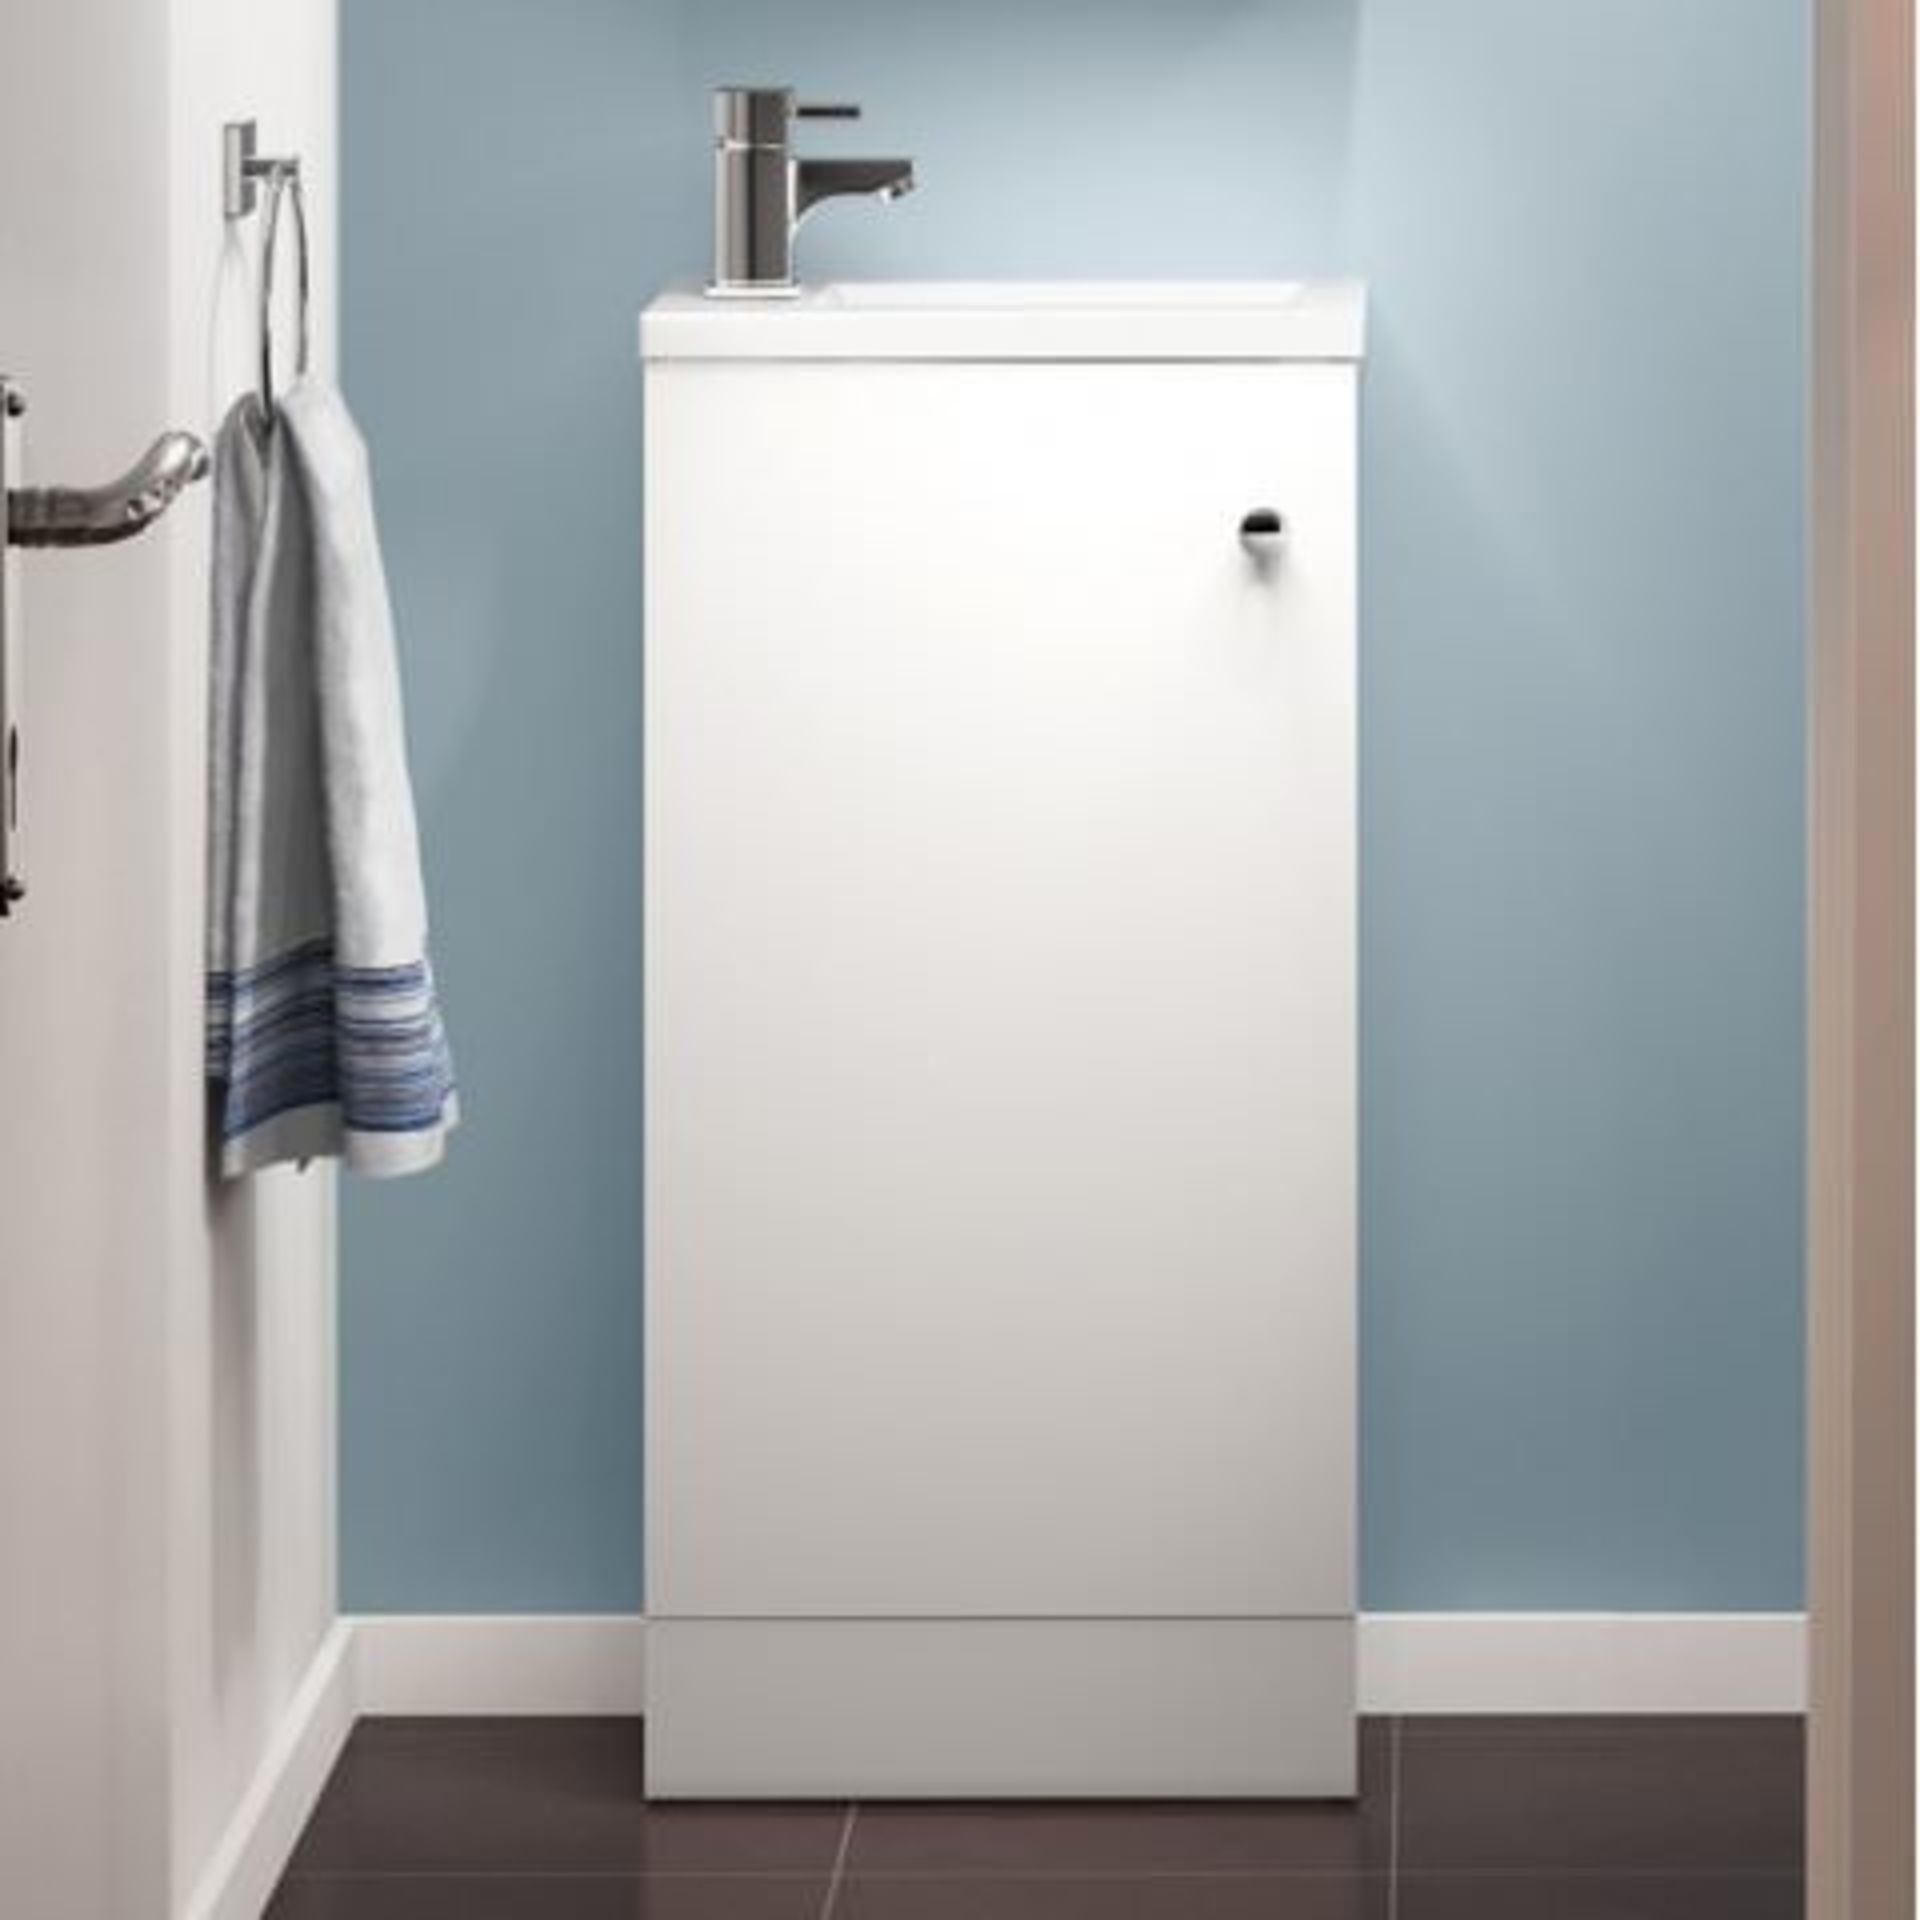 (L103) 400mm Blanc Matte White Basin Unit - Floor Standing. RRP £199.99. With its contemporary,